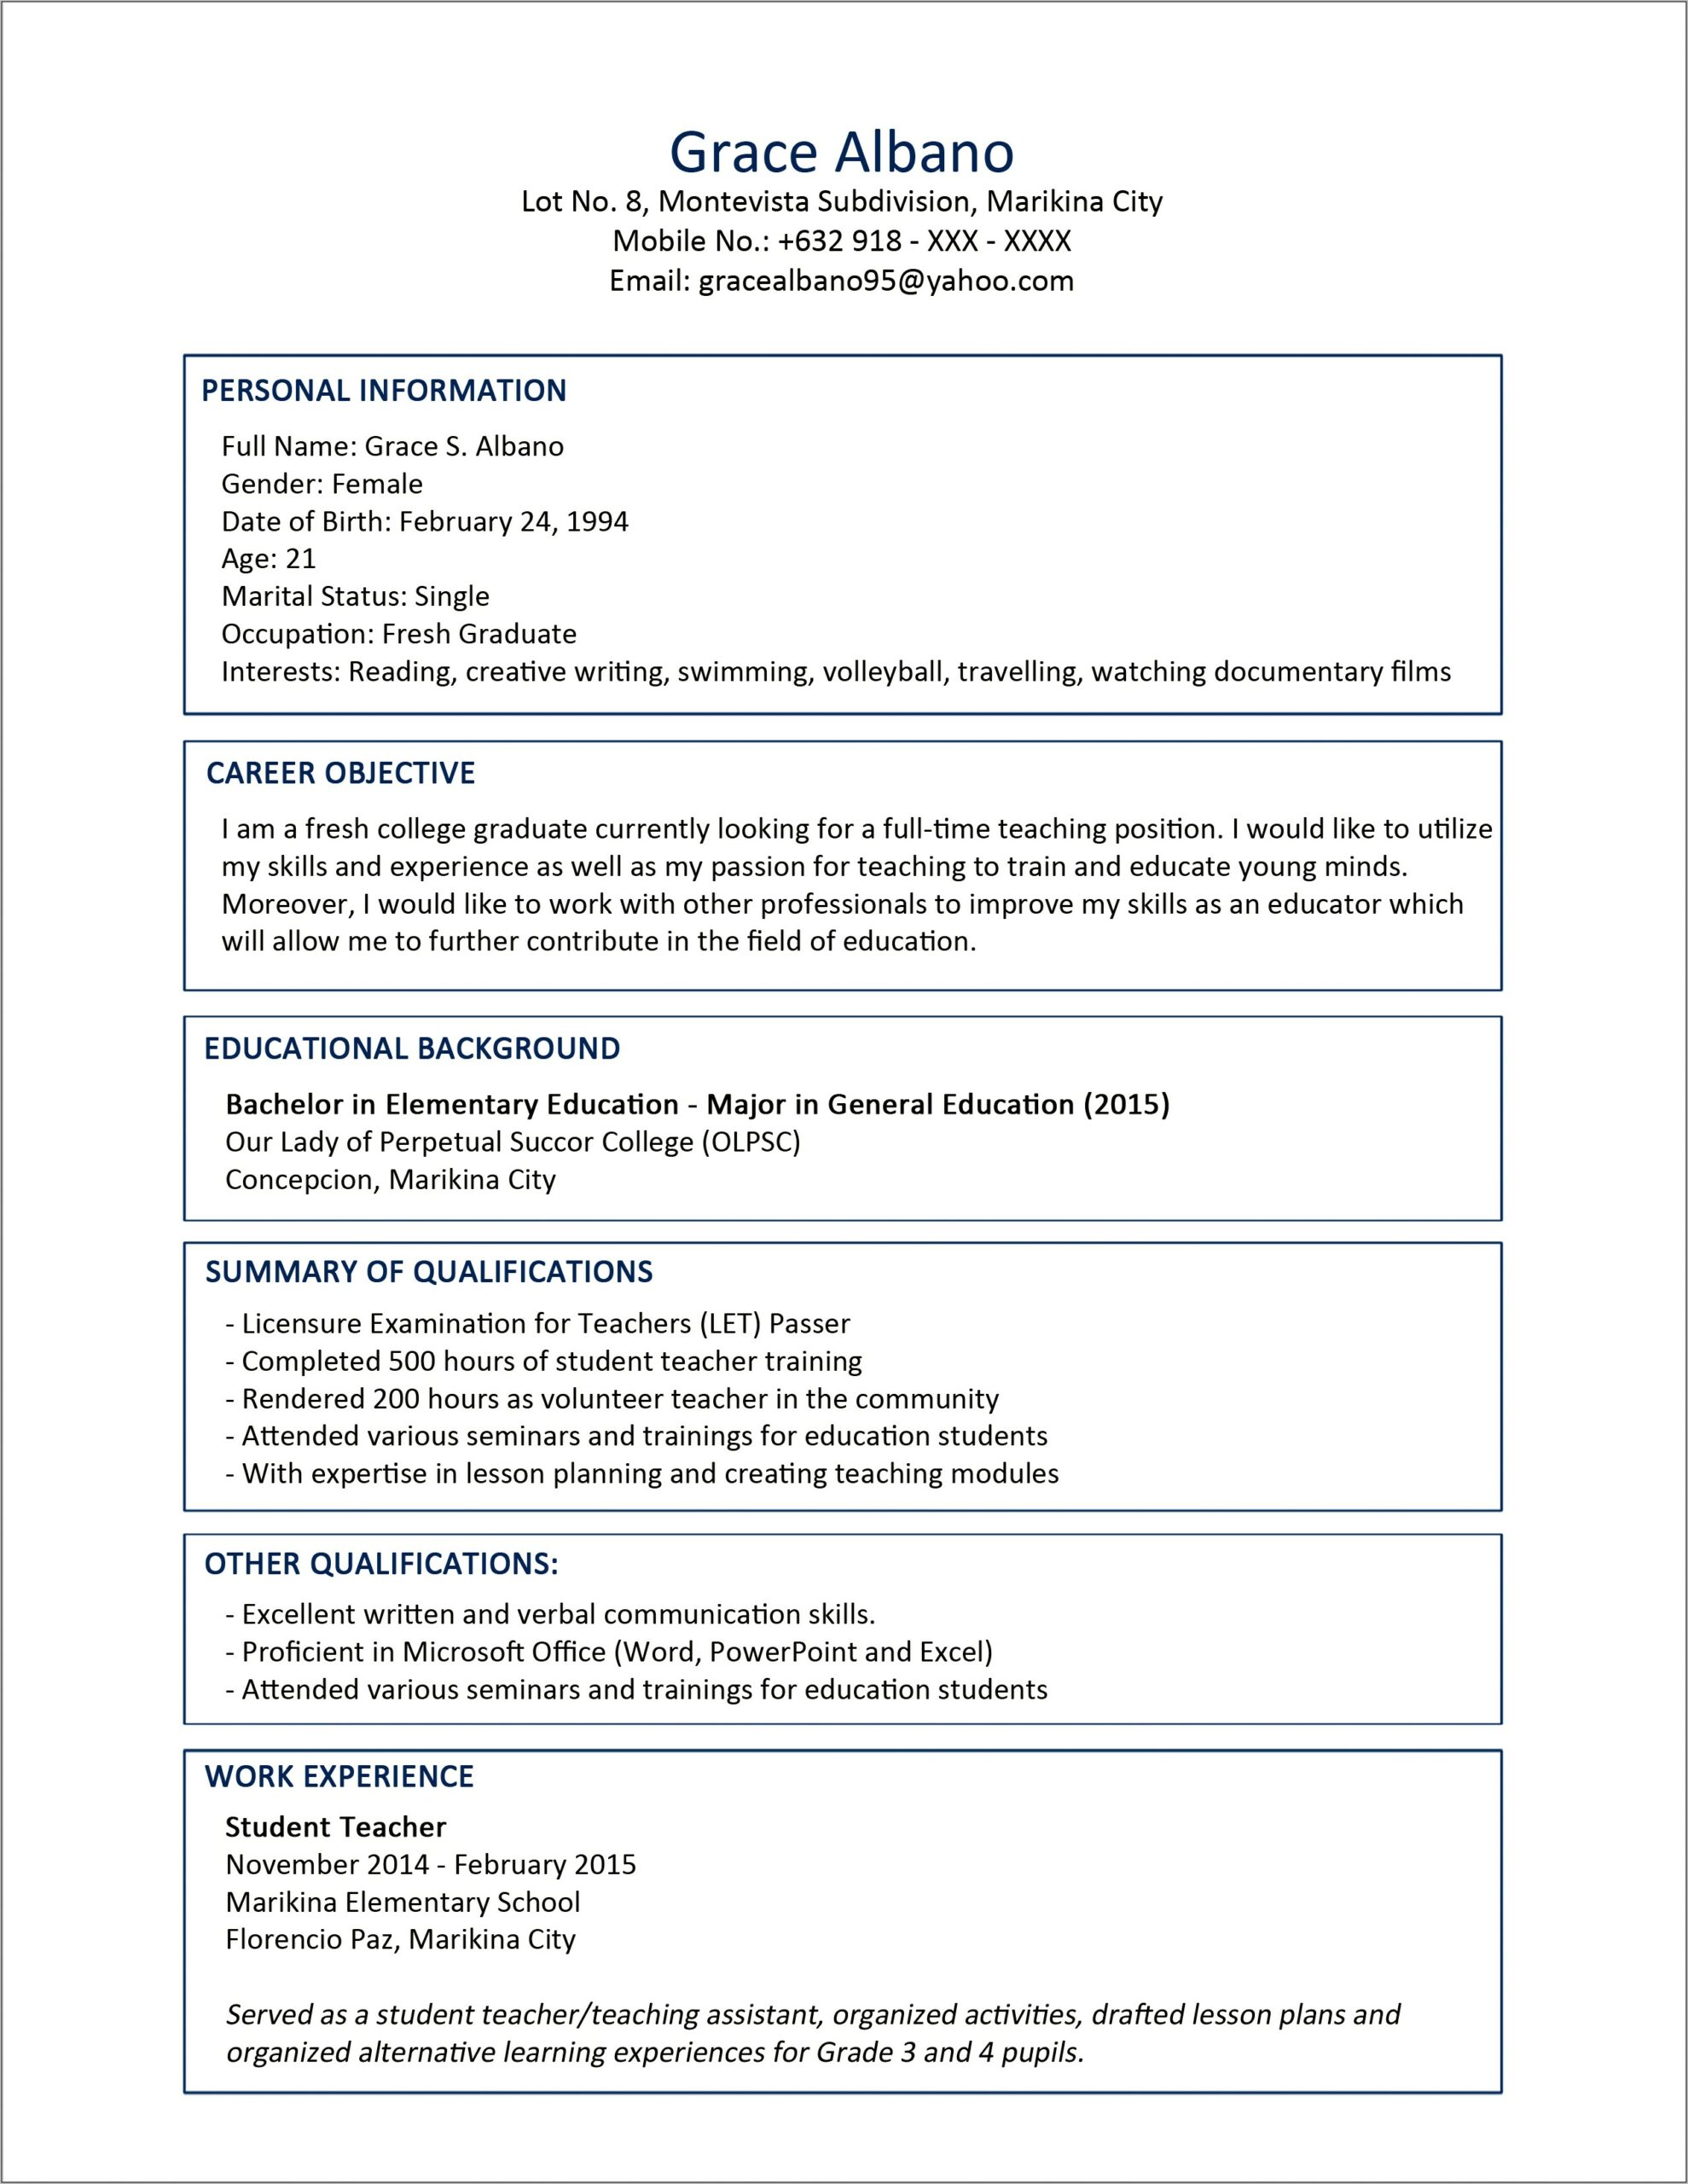 Resume Skills And Qualification Examples